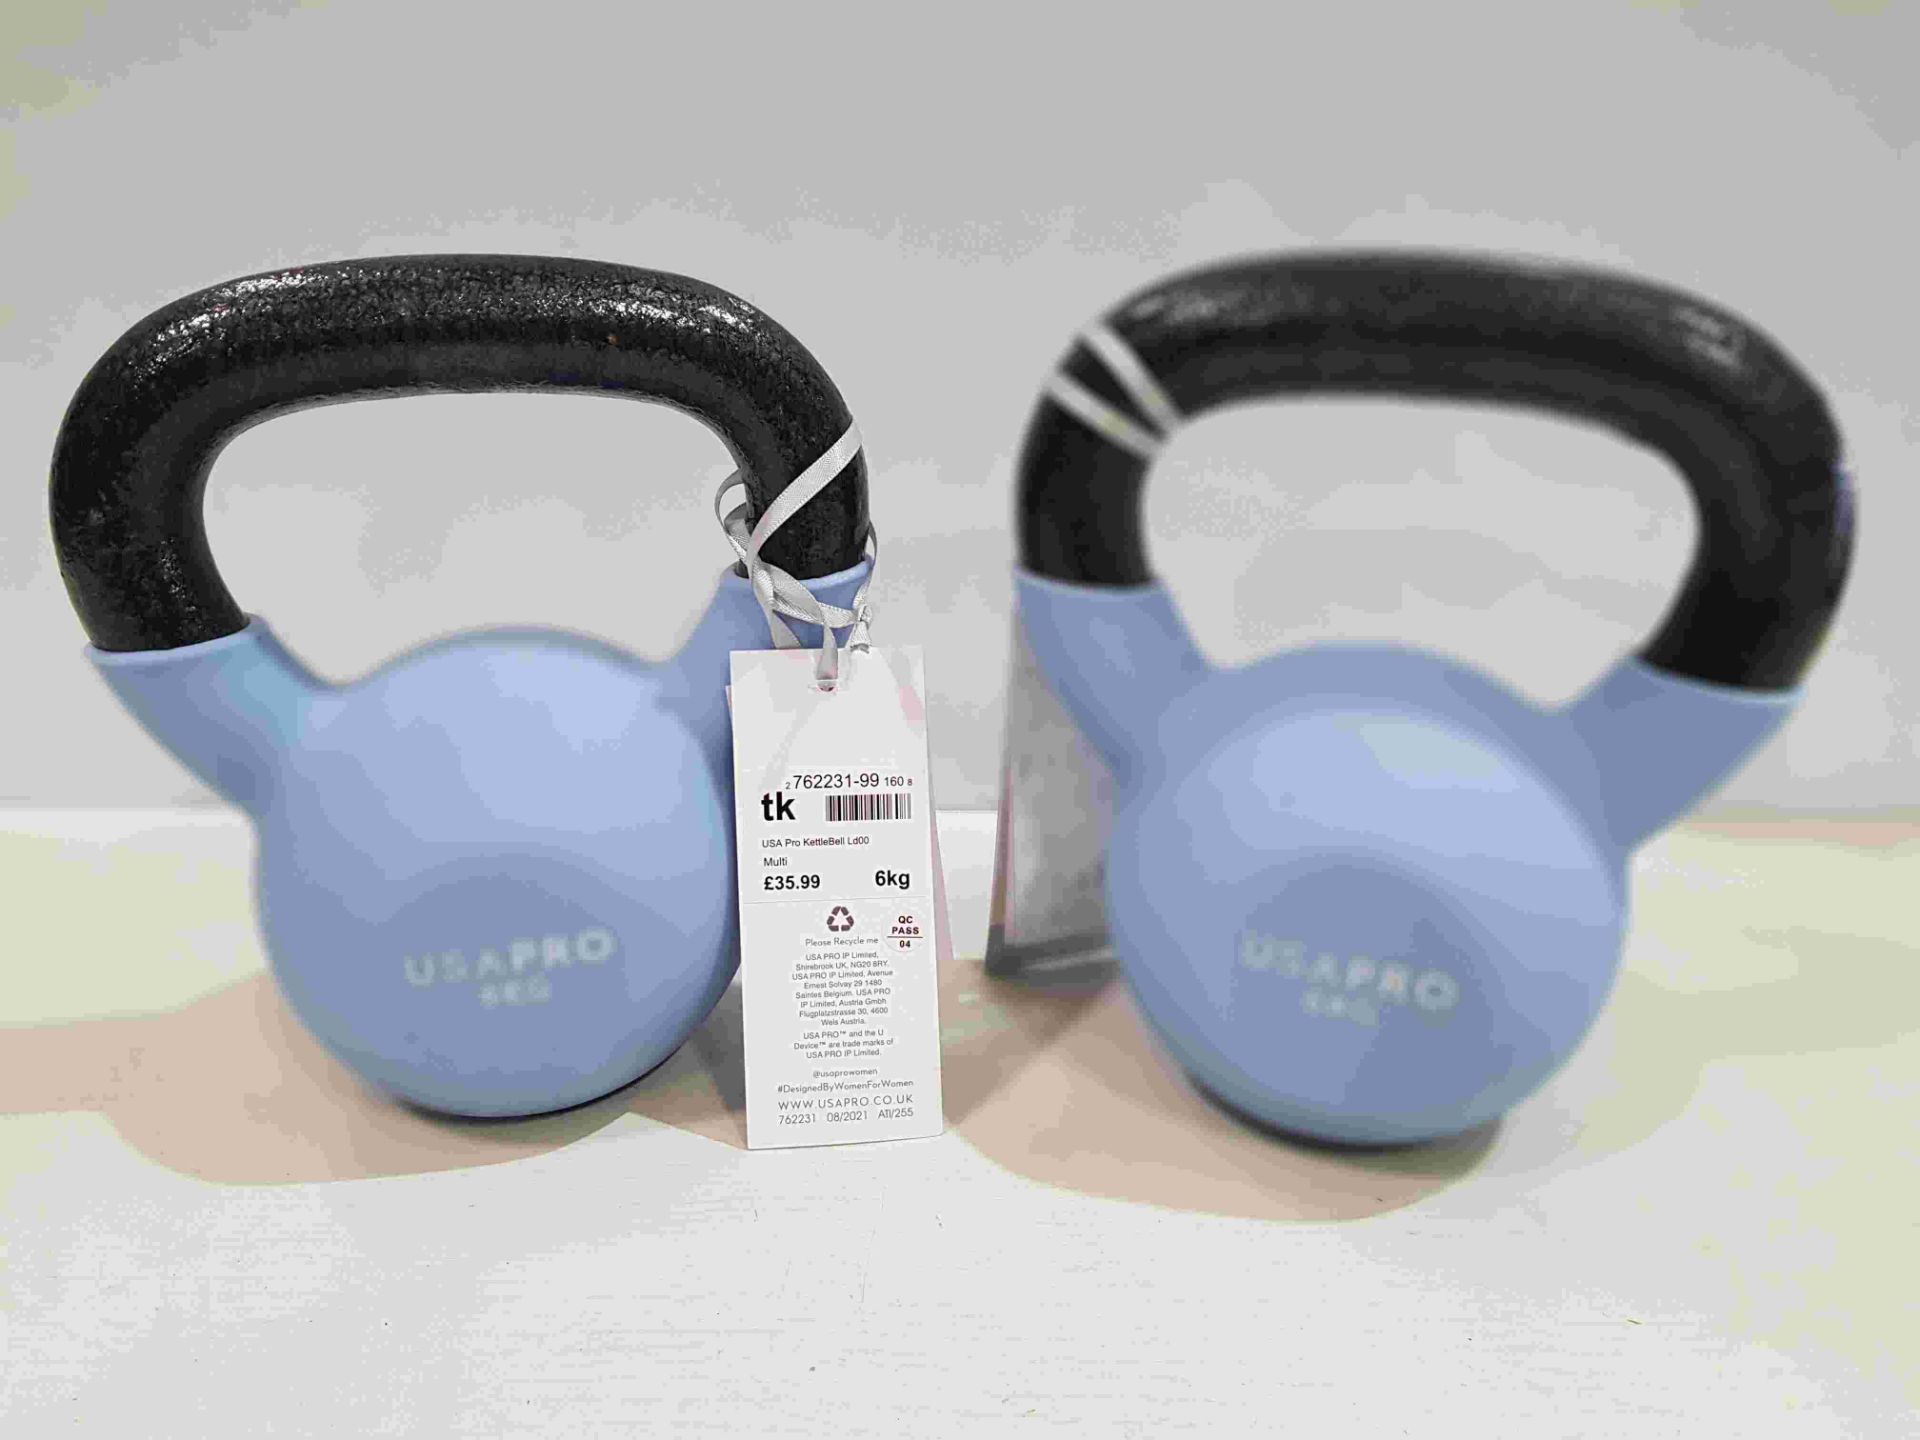 20 X BRAND NEW USA PRO 6 KG KETTLE BELL EXERCISE WEIGHTS (10 PAIRS) - RRP £35.99 PP £71.98 PER